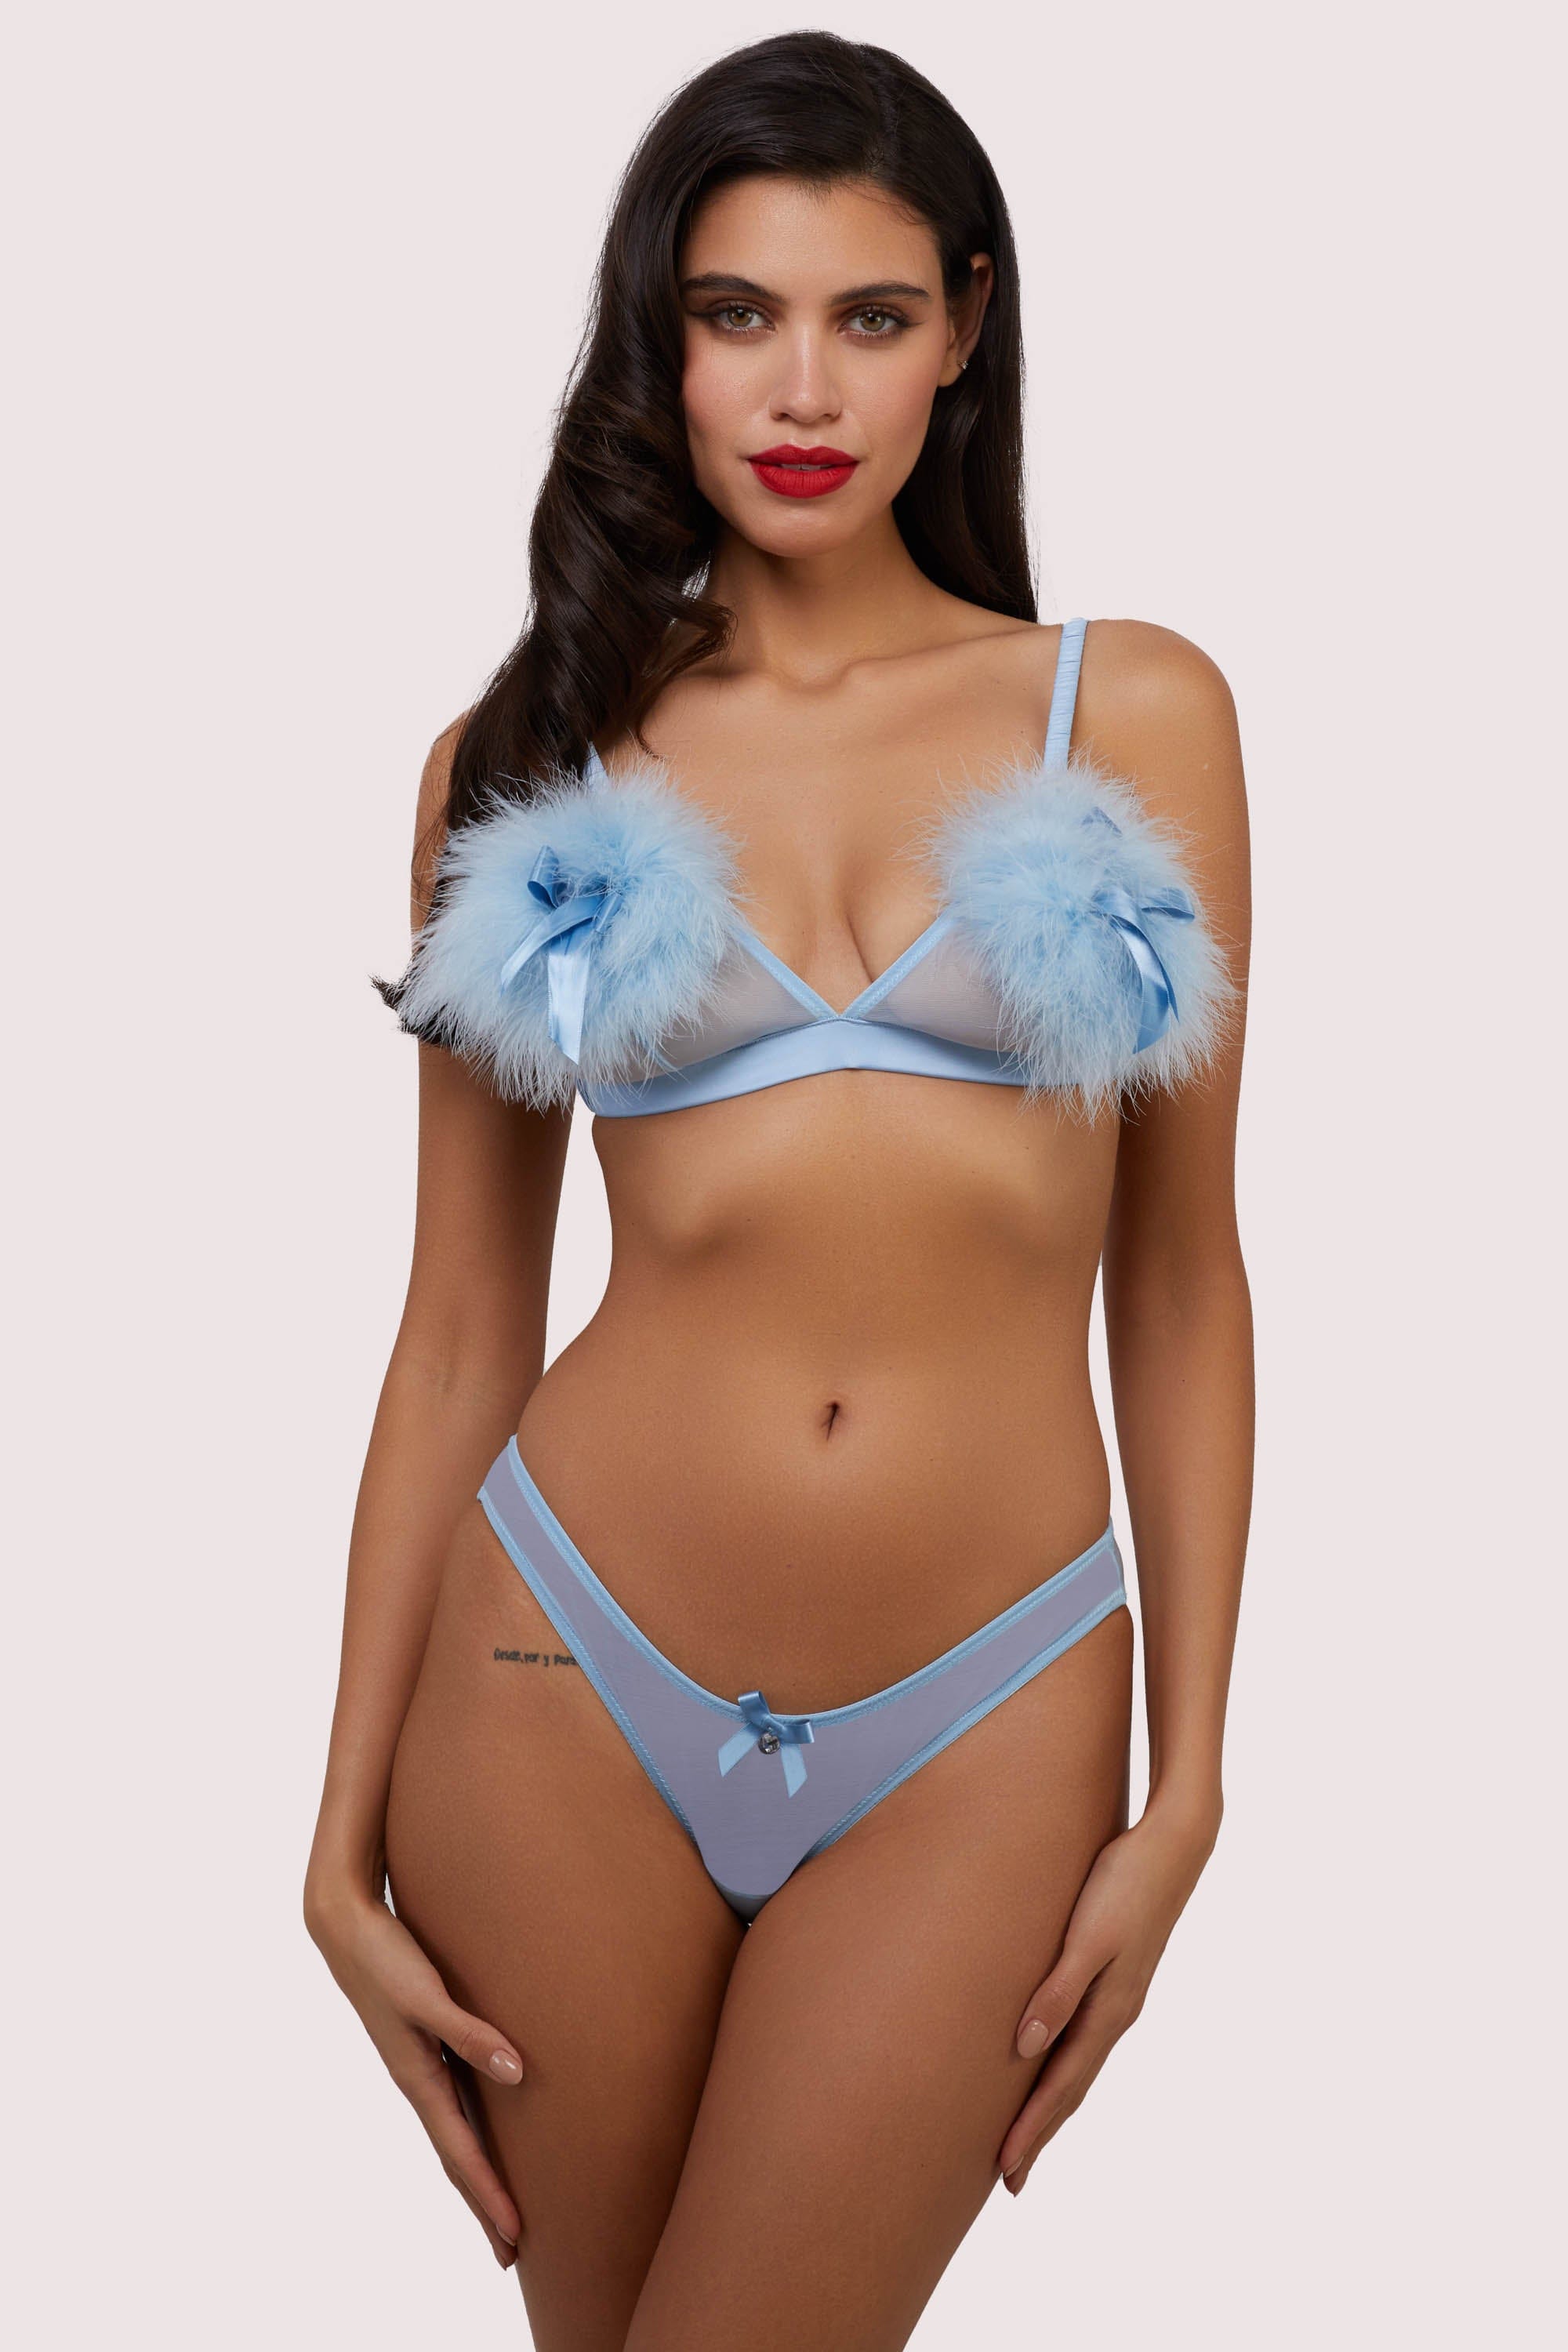 model wears blue triangle bra and brief lingerie set